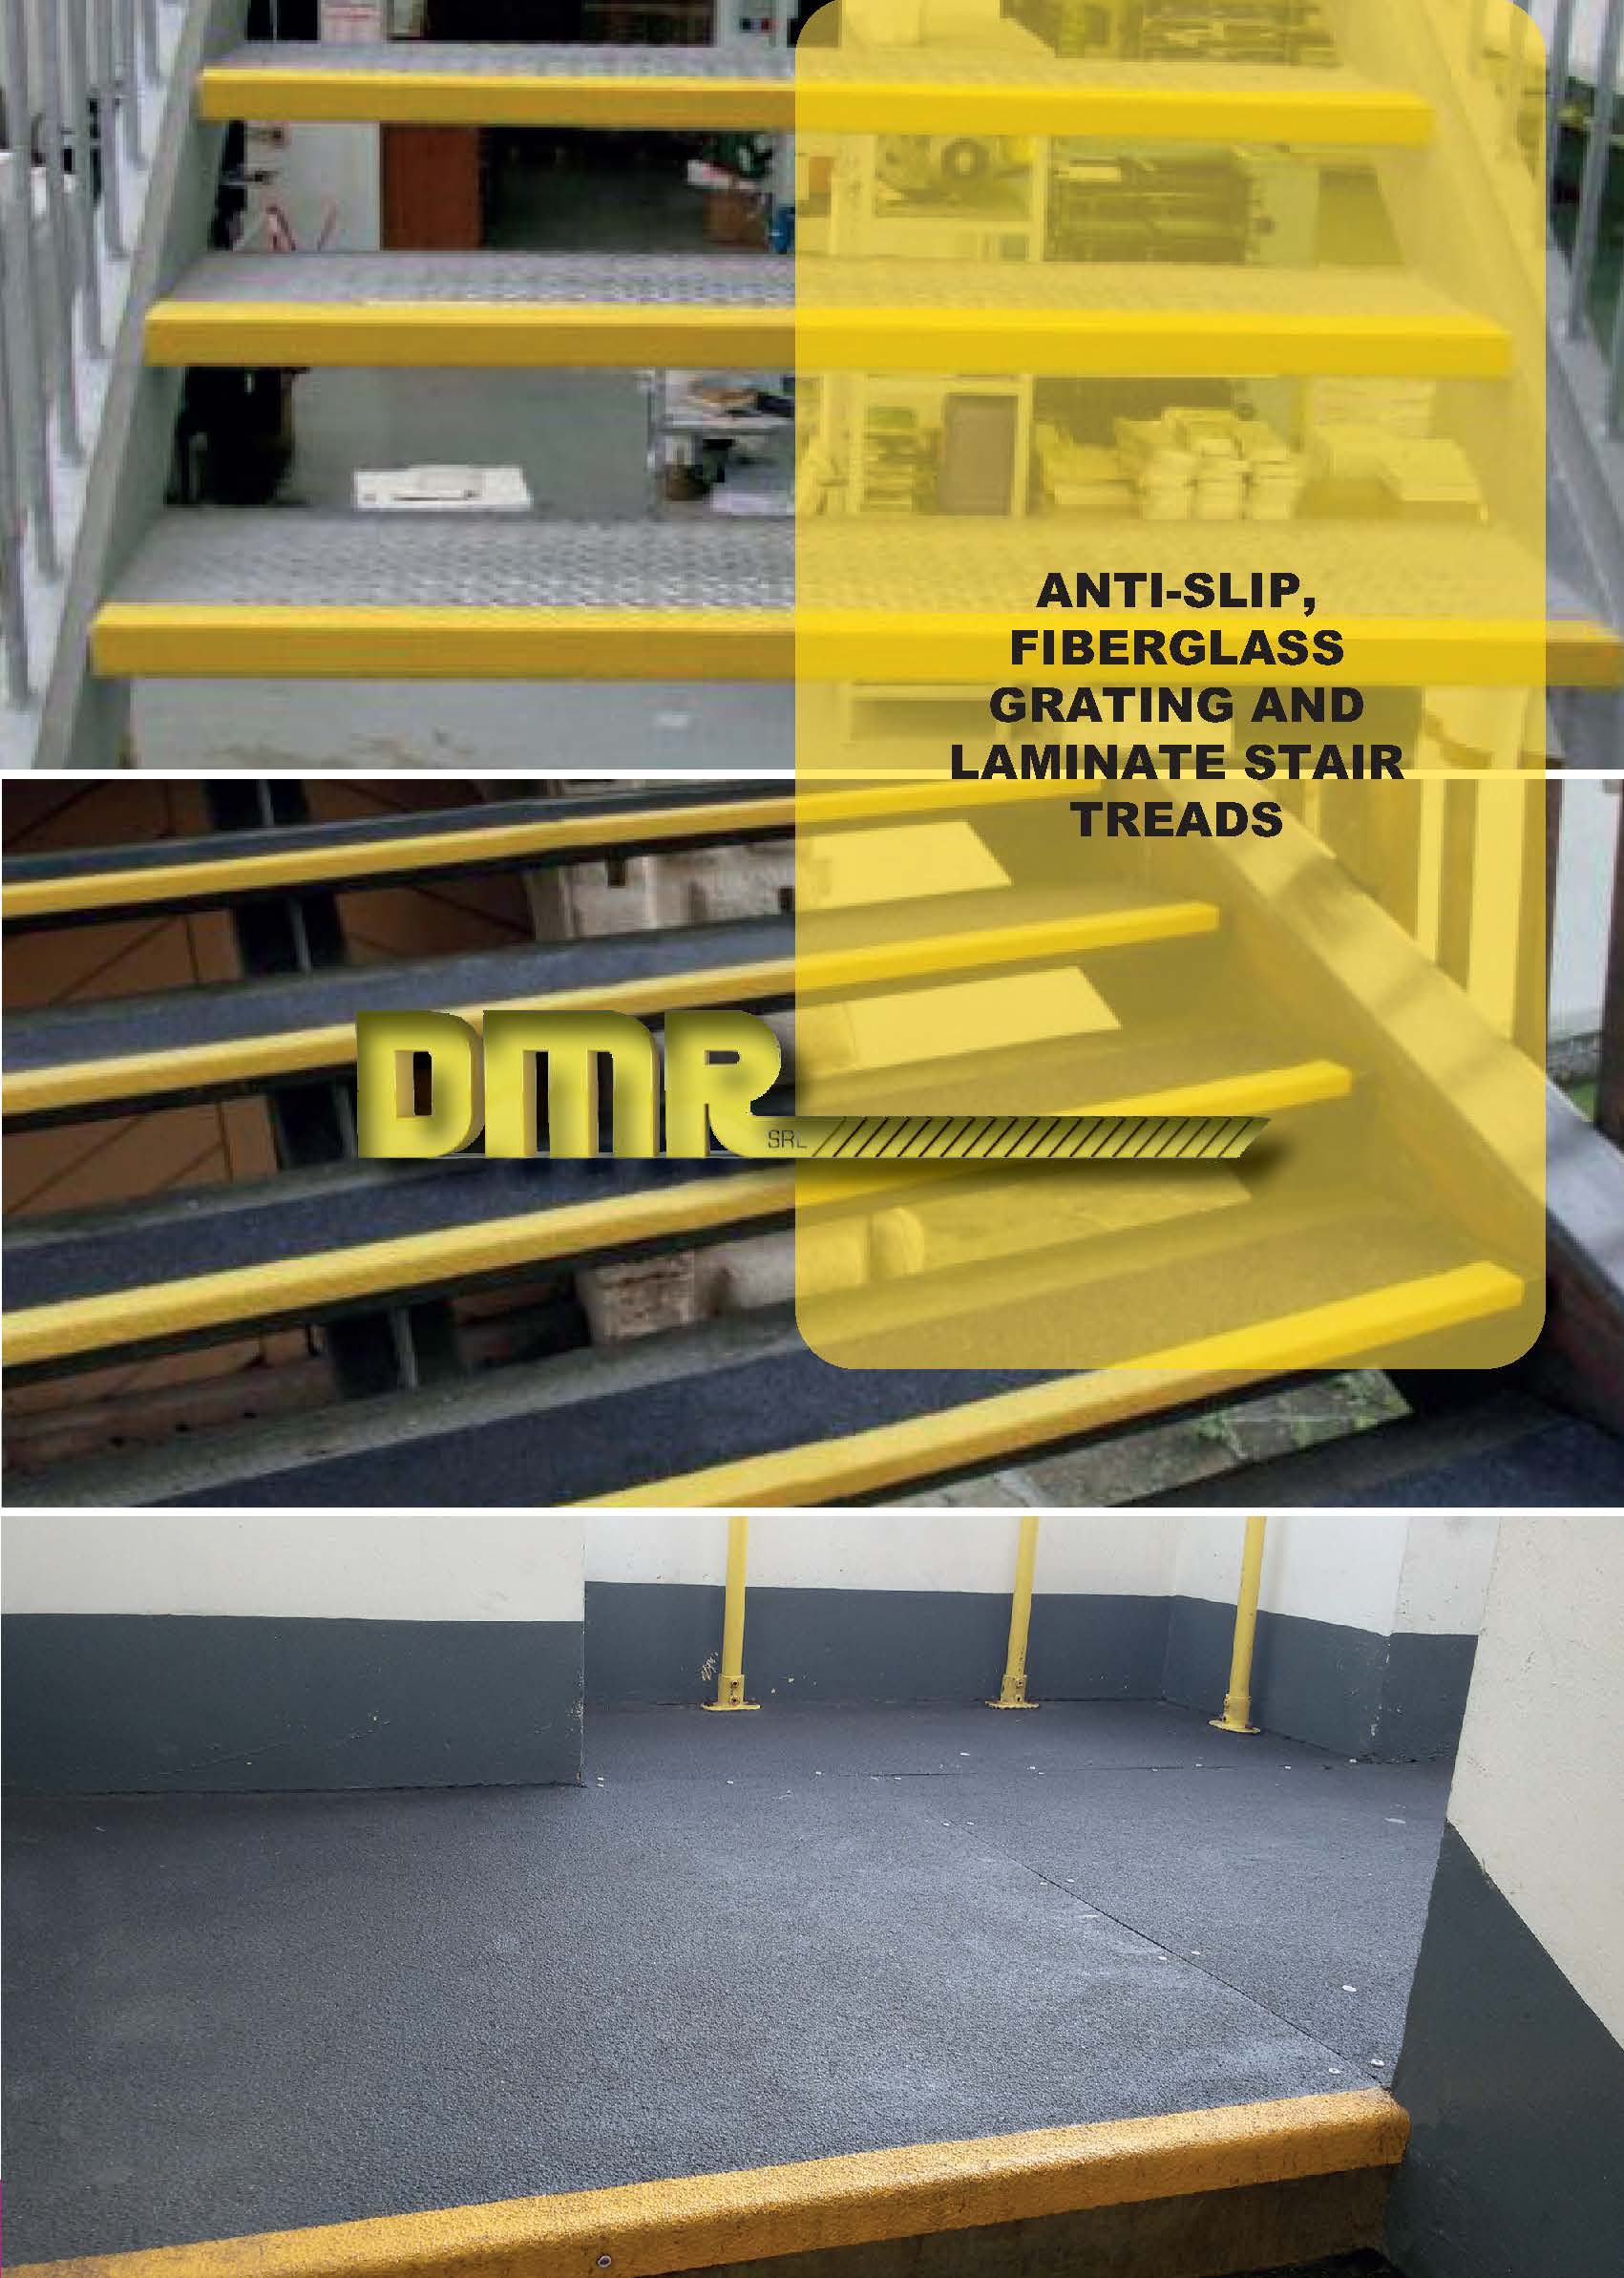 Laminated stair covers Catalog